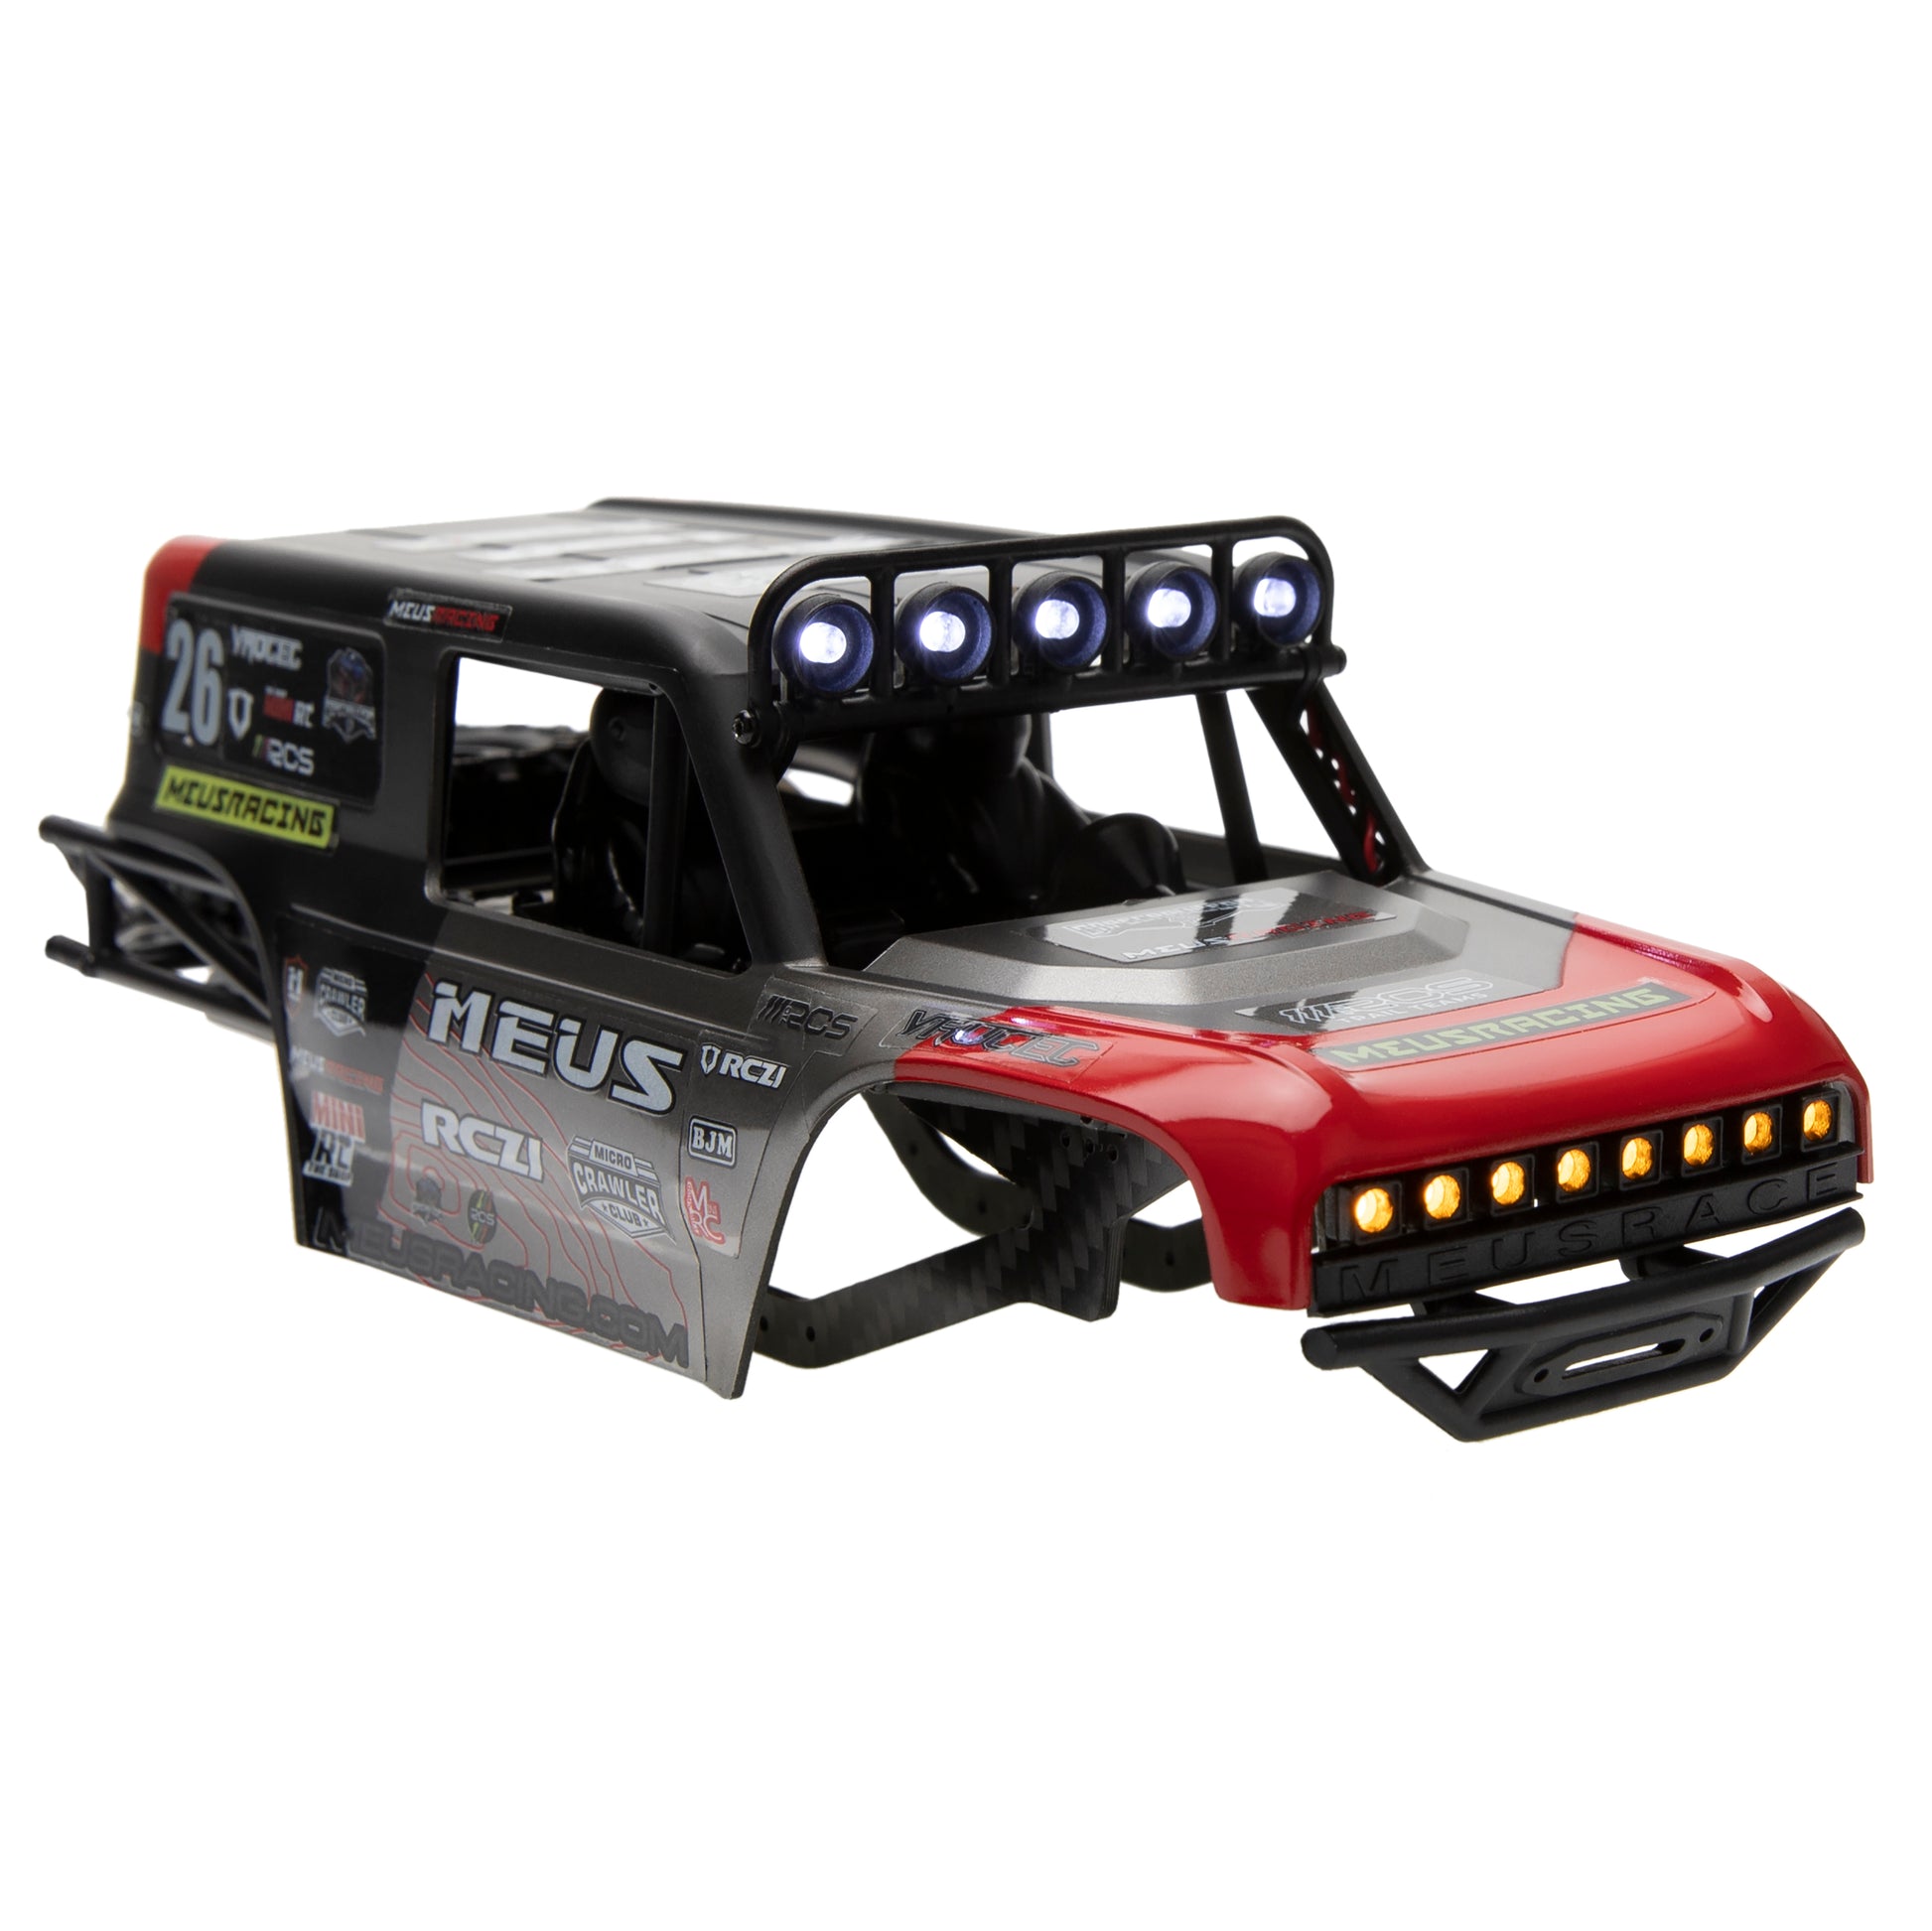 Red MB24 ABS body shell with light kit for SCX24